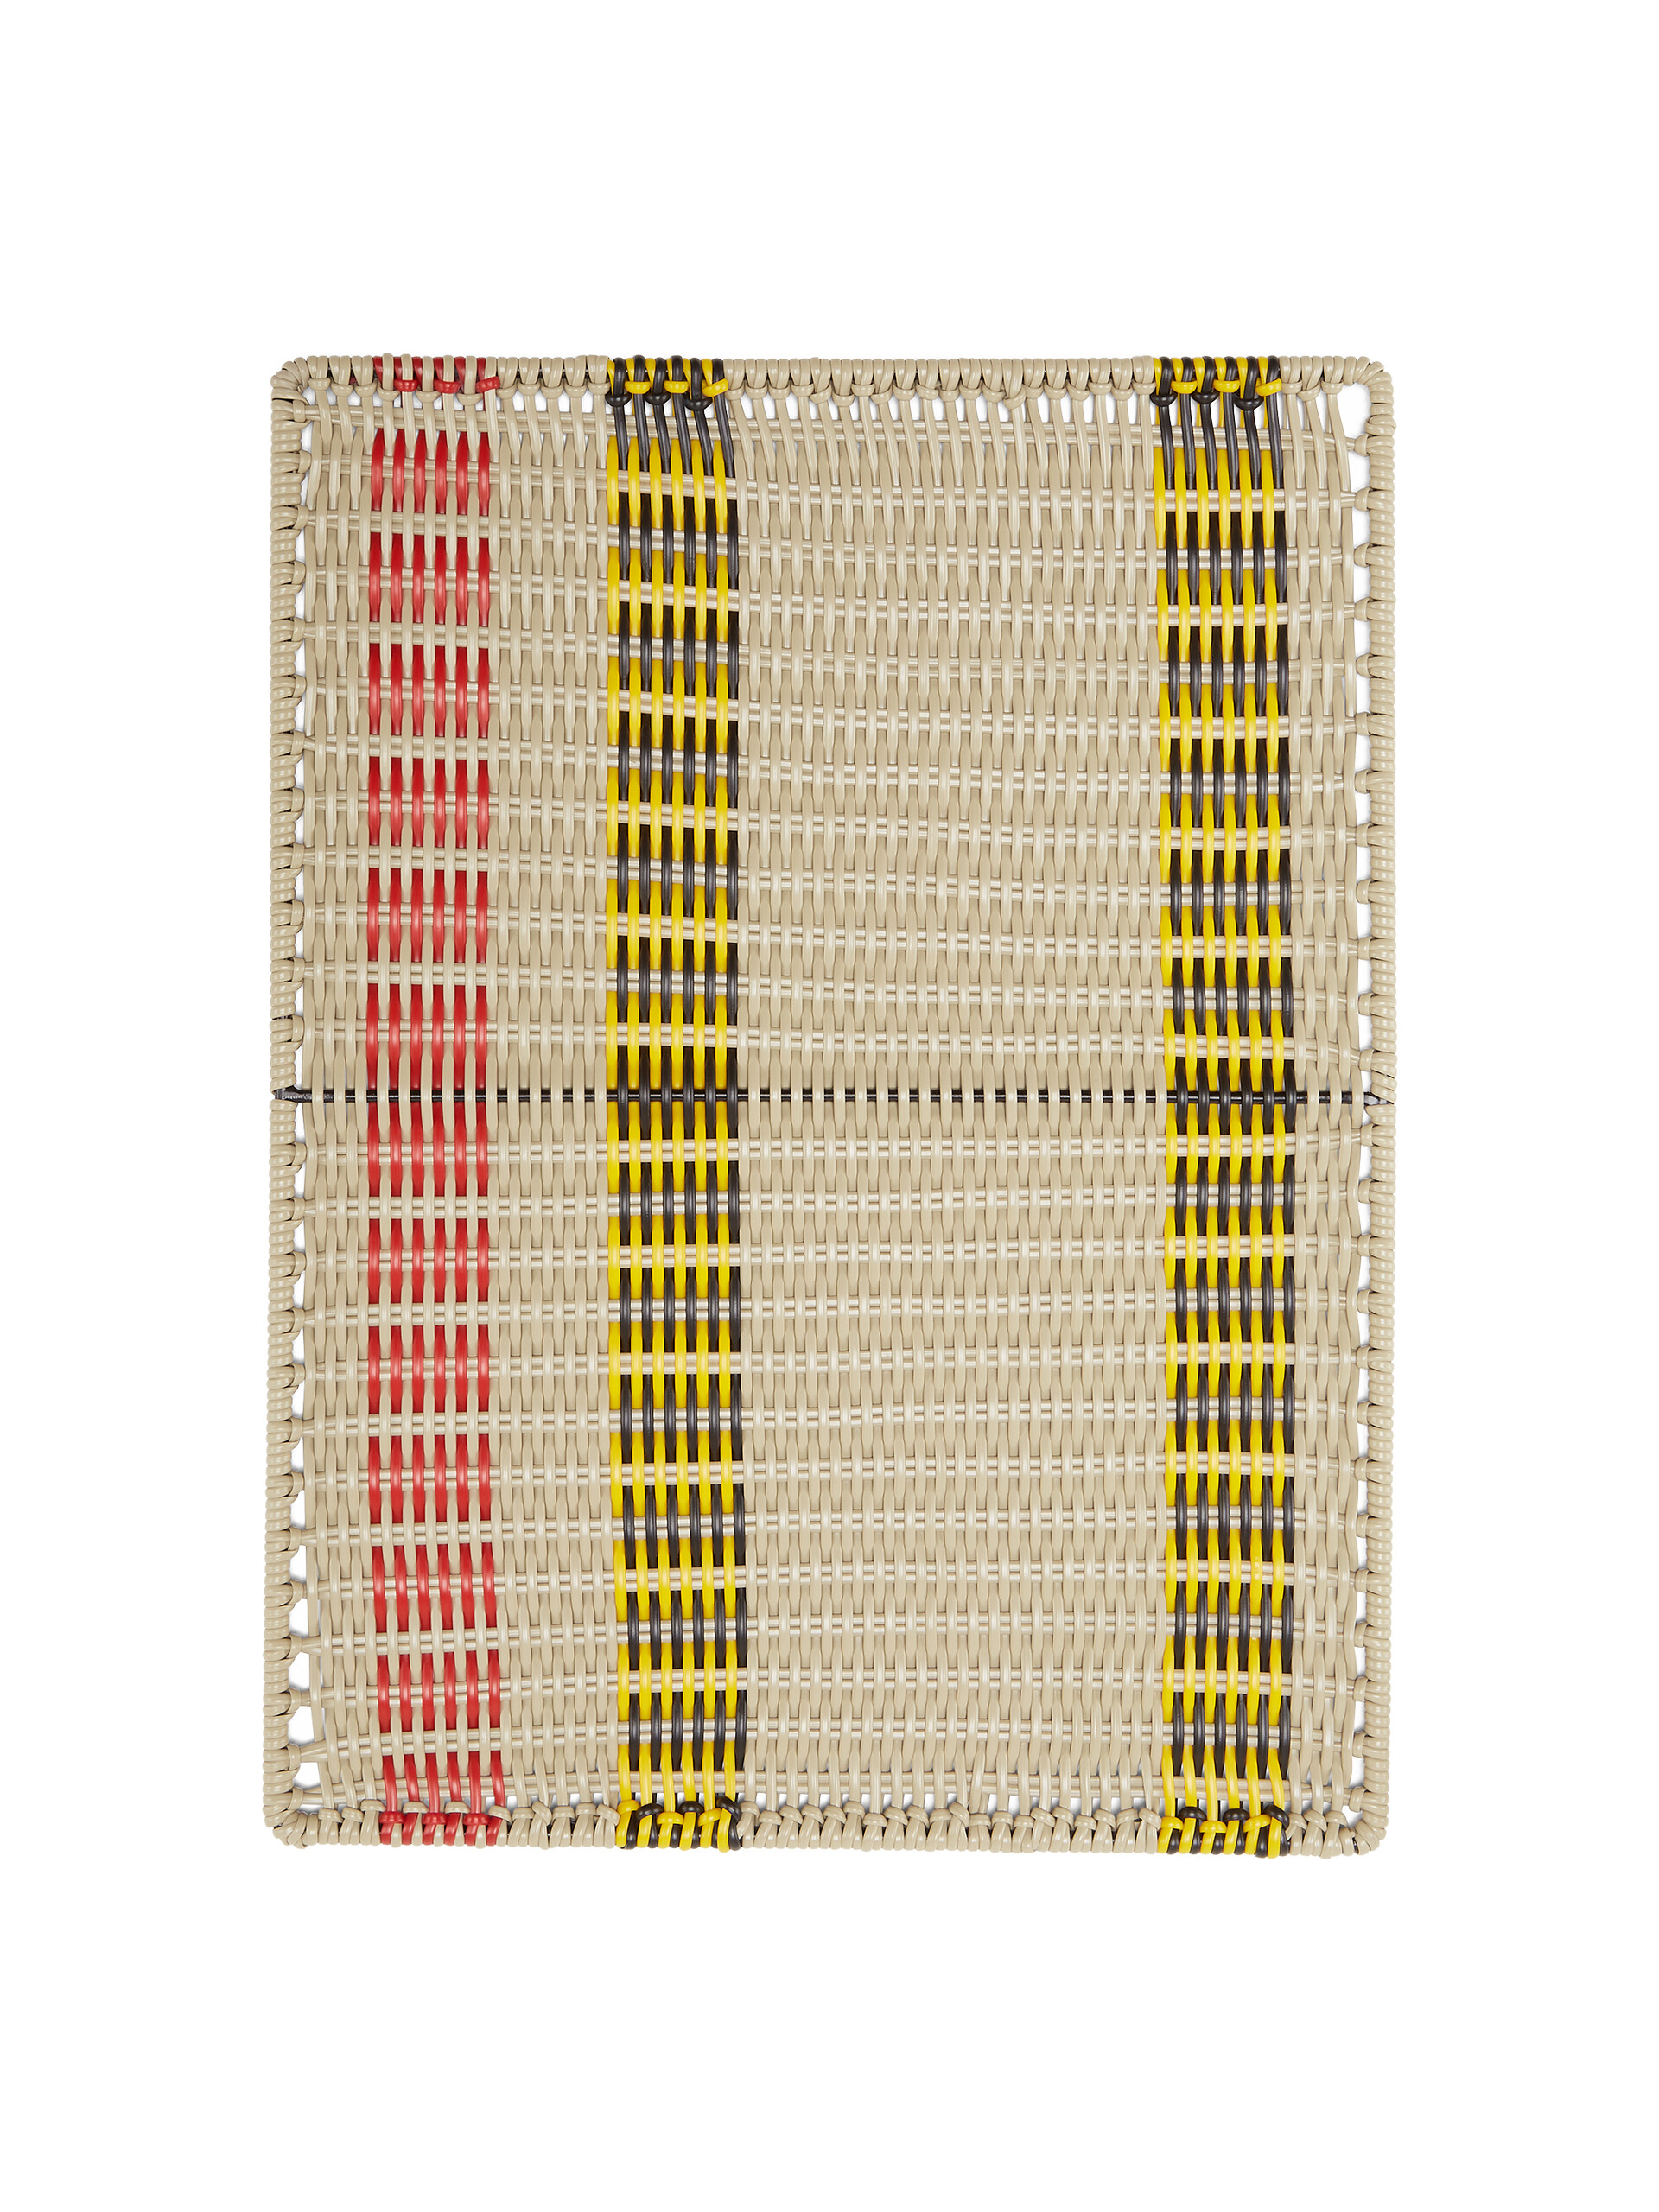 MARNI MARKET rectangular placemat with striped motif in iron and yellow, black, red and beige woven PVC - Home Accessories - Image 2